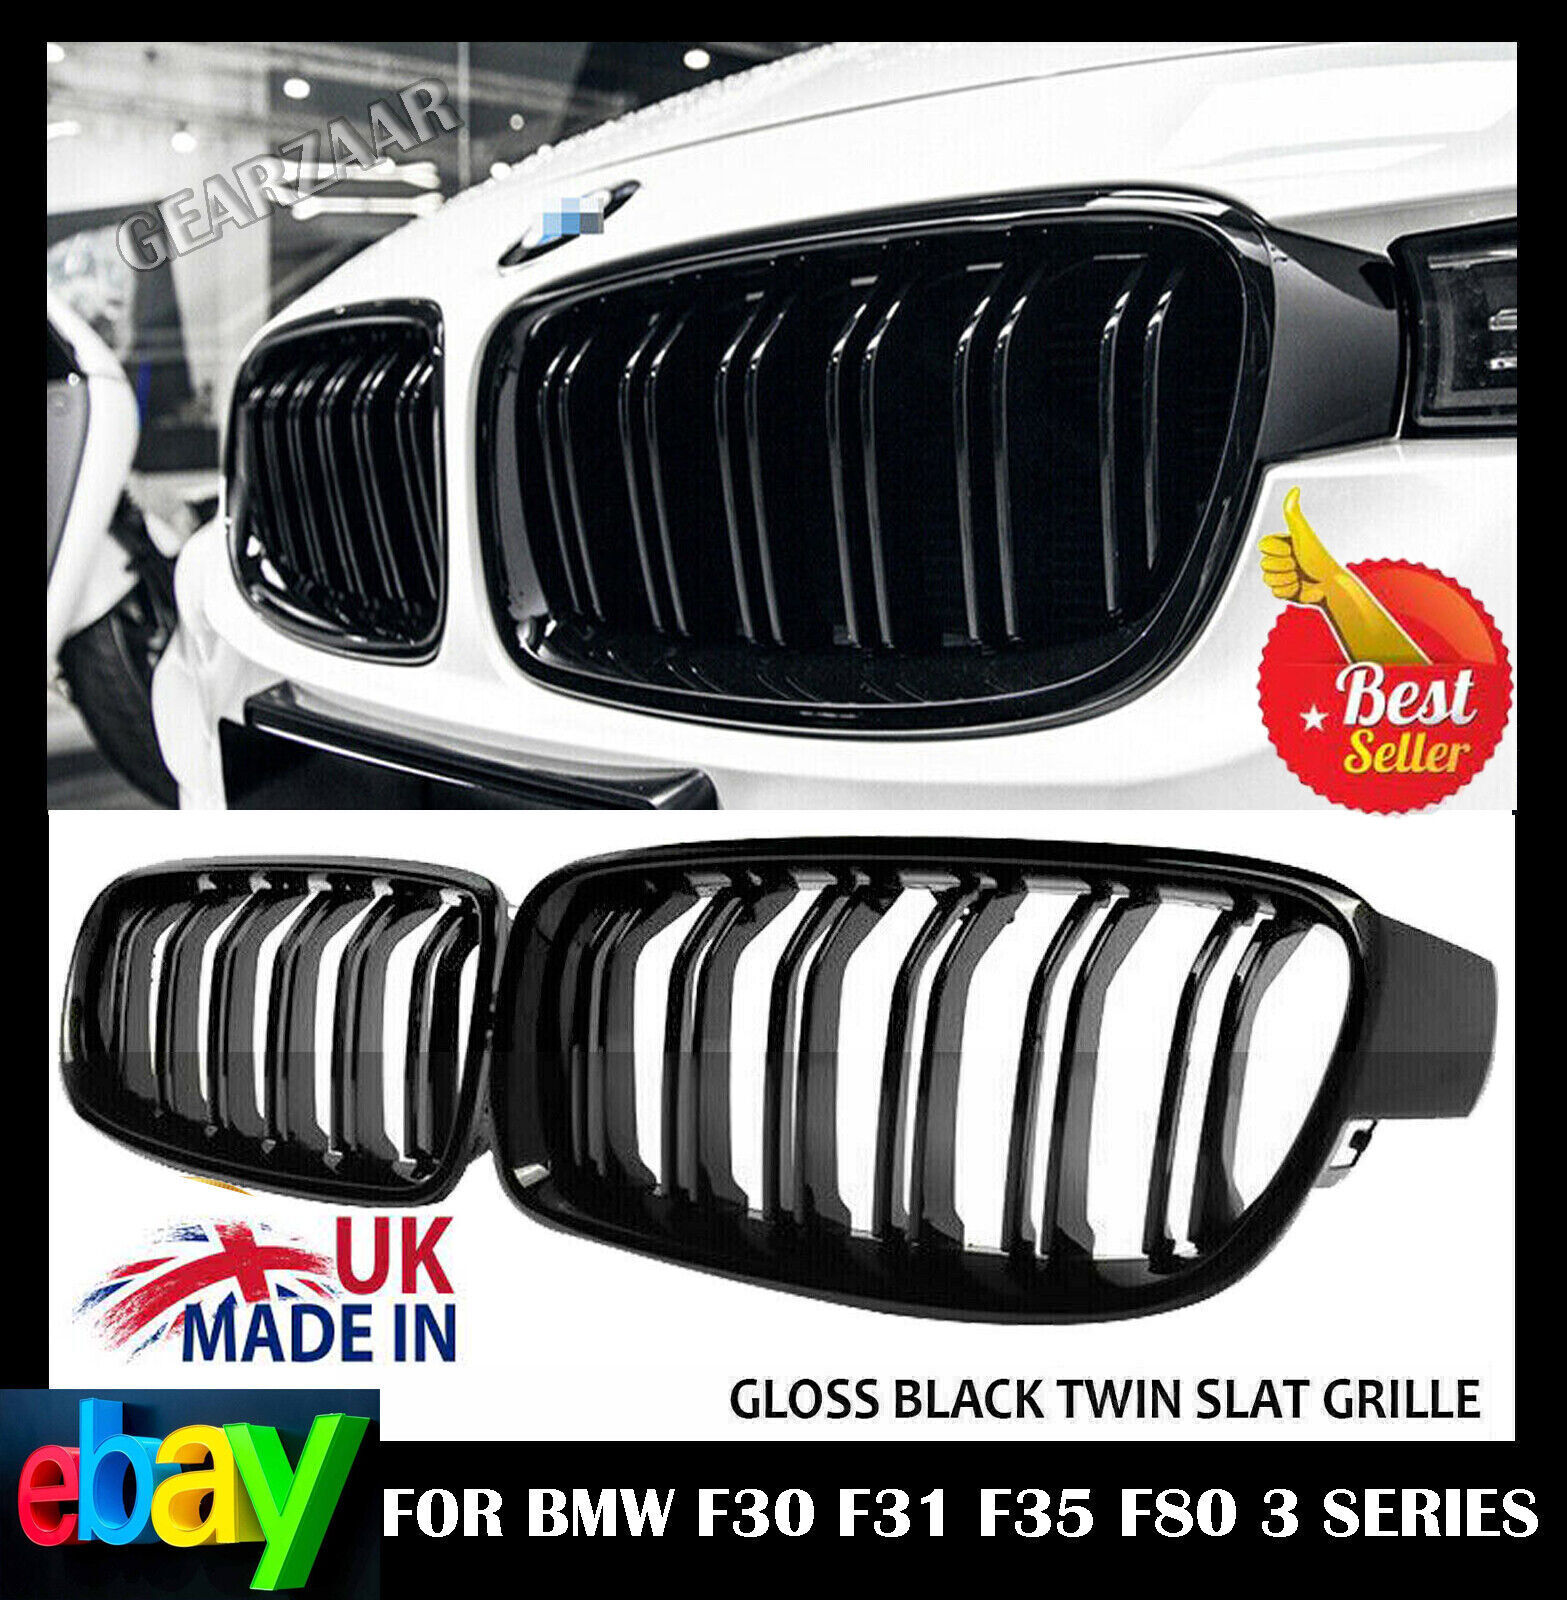 FOR BMW F30 F31 3 SERIES GLOSS BLACK DUAL LINE KIDNEY GRILLE M PERFORMANCE STYLE